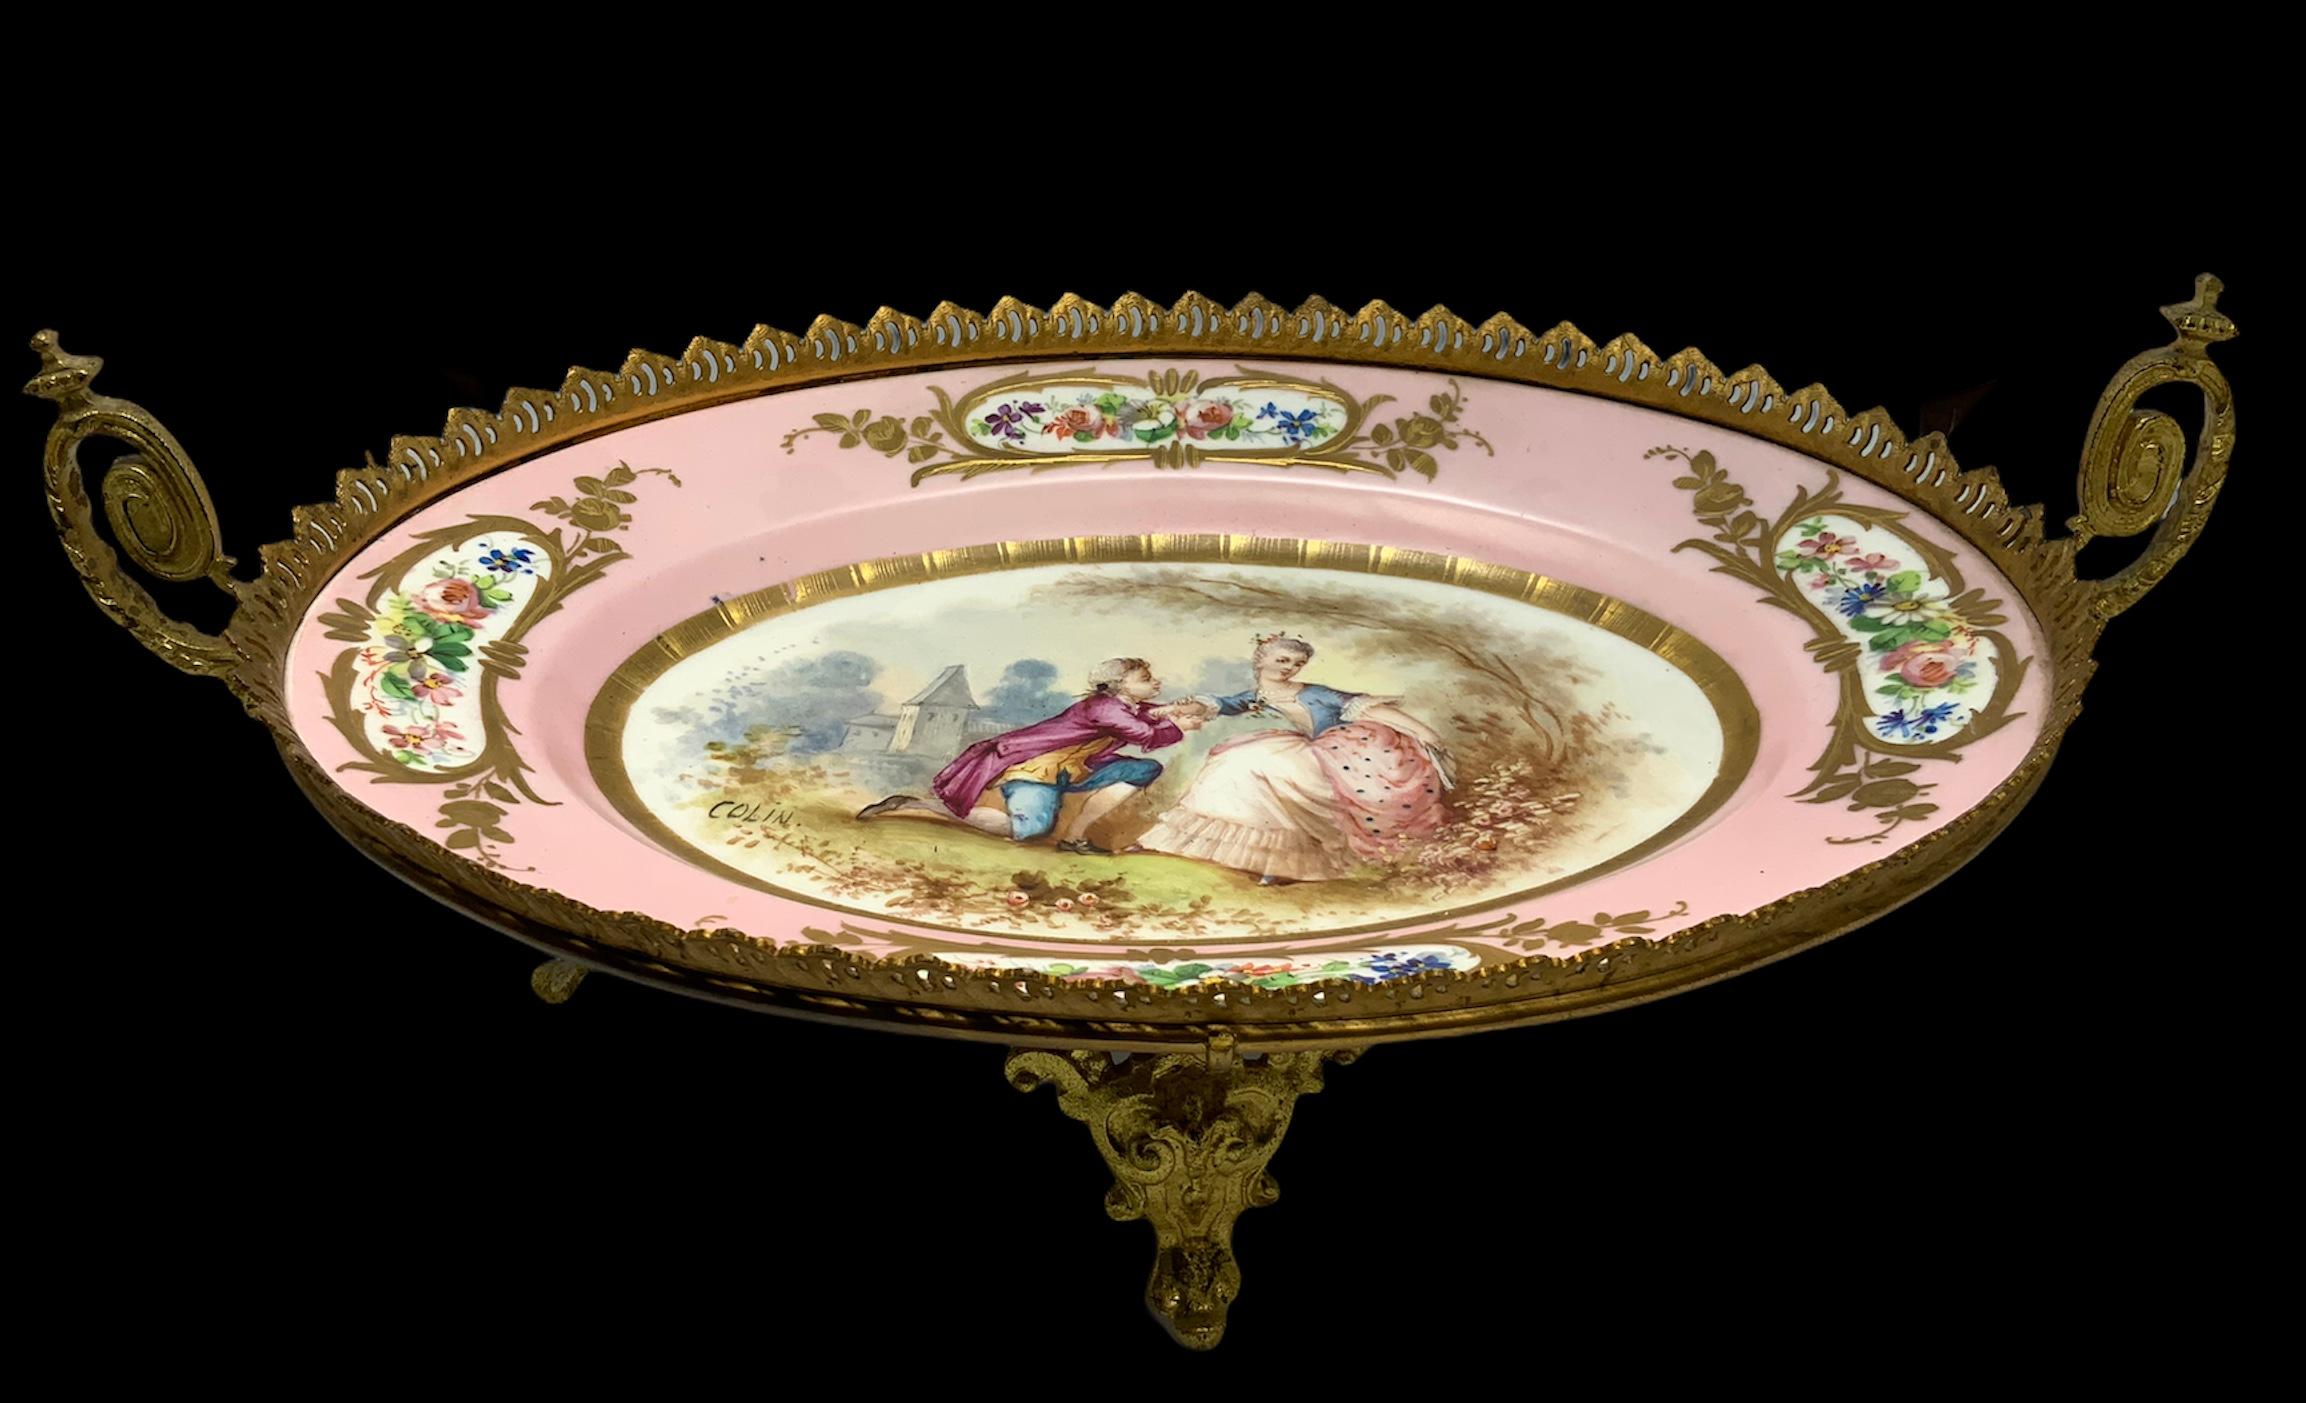 An 1846 Sevres Porcelain hand painted with a romantic couple scene in a pastoral setting and signed by Colin in the center of a pink dish. Adorned with flowers and gold acanthus leaves and mounted in a bronzed pierced ruffle border. Gilt bronze coil